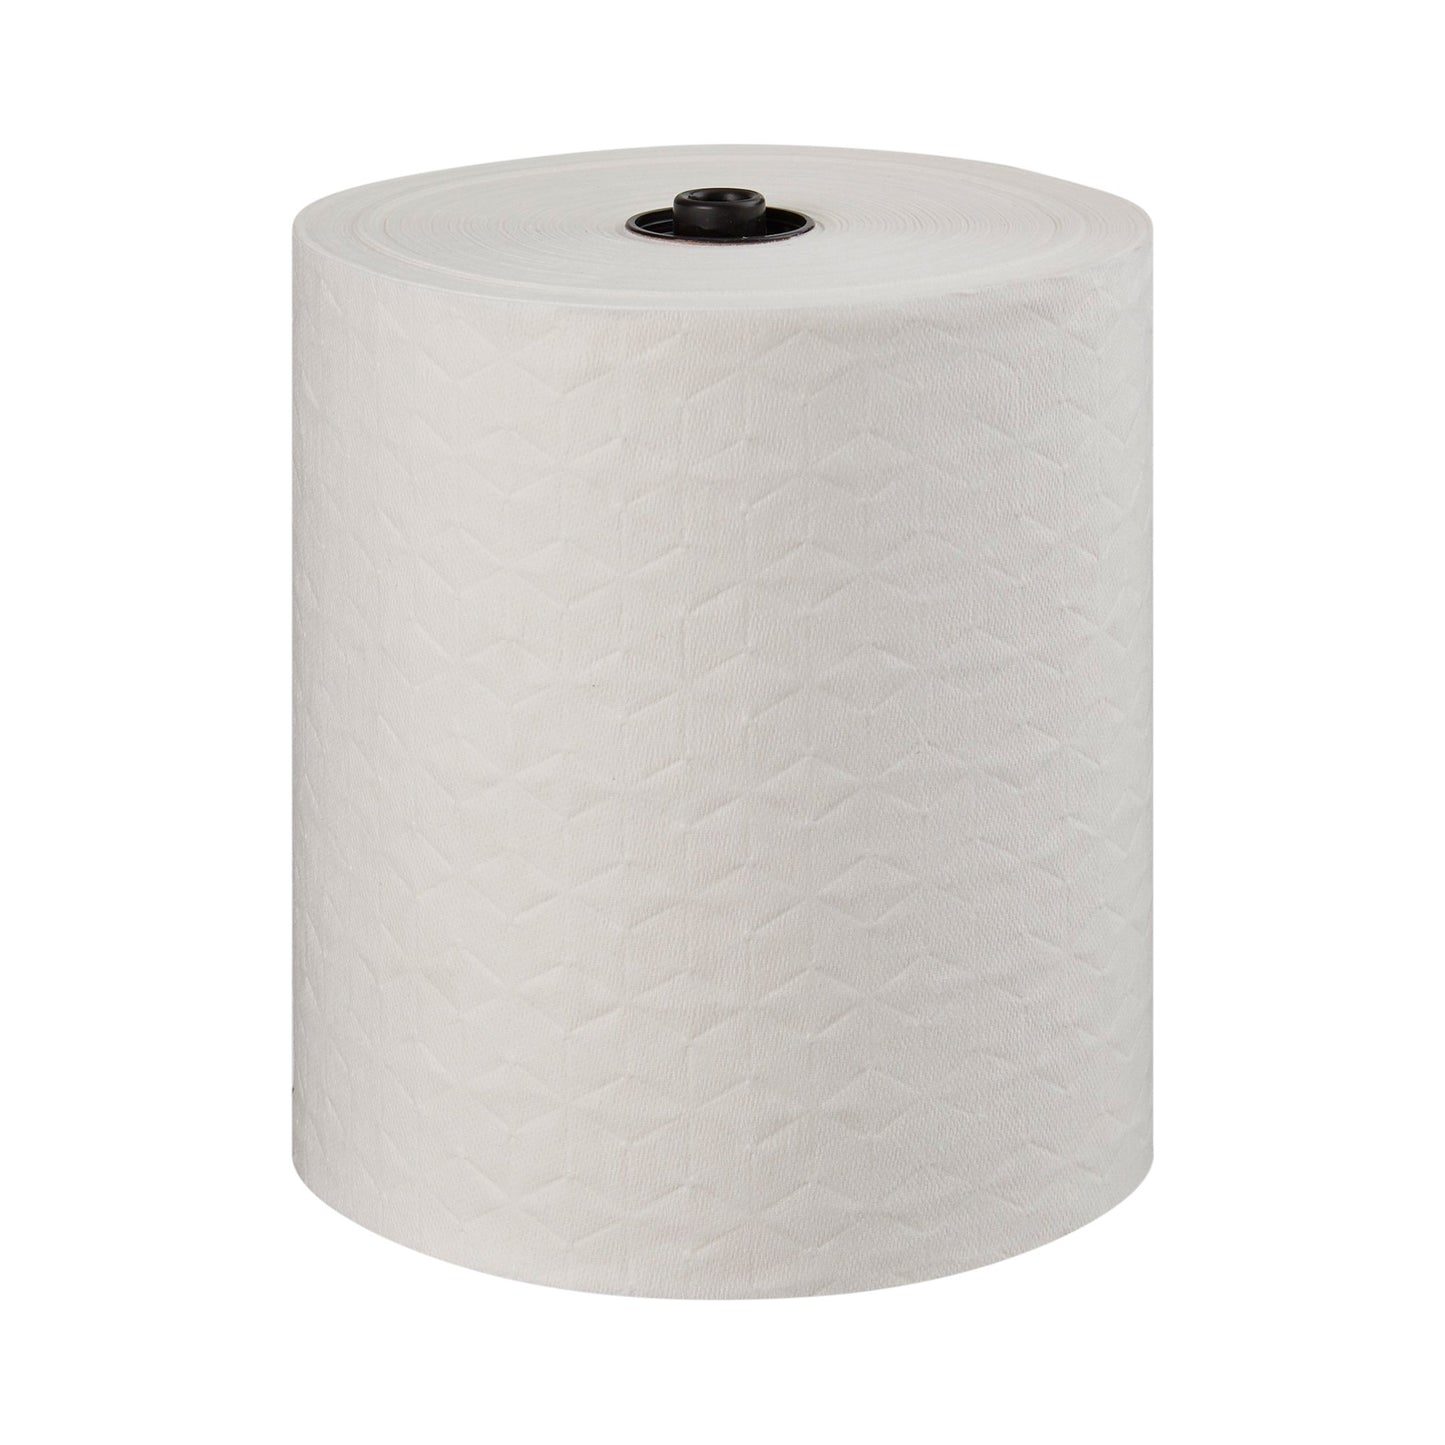 Georgia Pacific Paper Towel enMotion White Premium Touchless Roll 8-1/5 Inch X 425 Foot